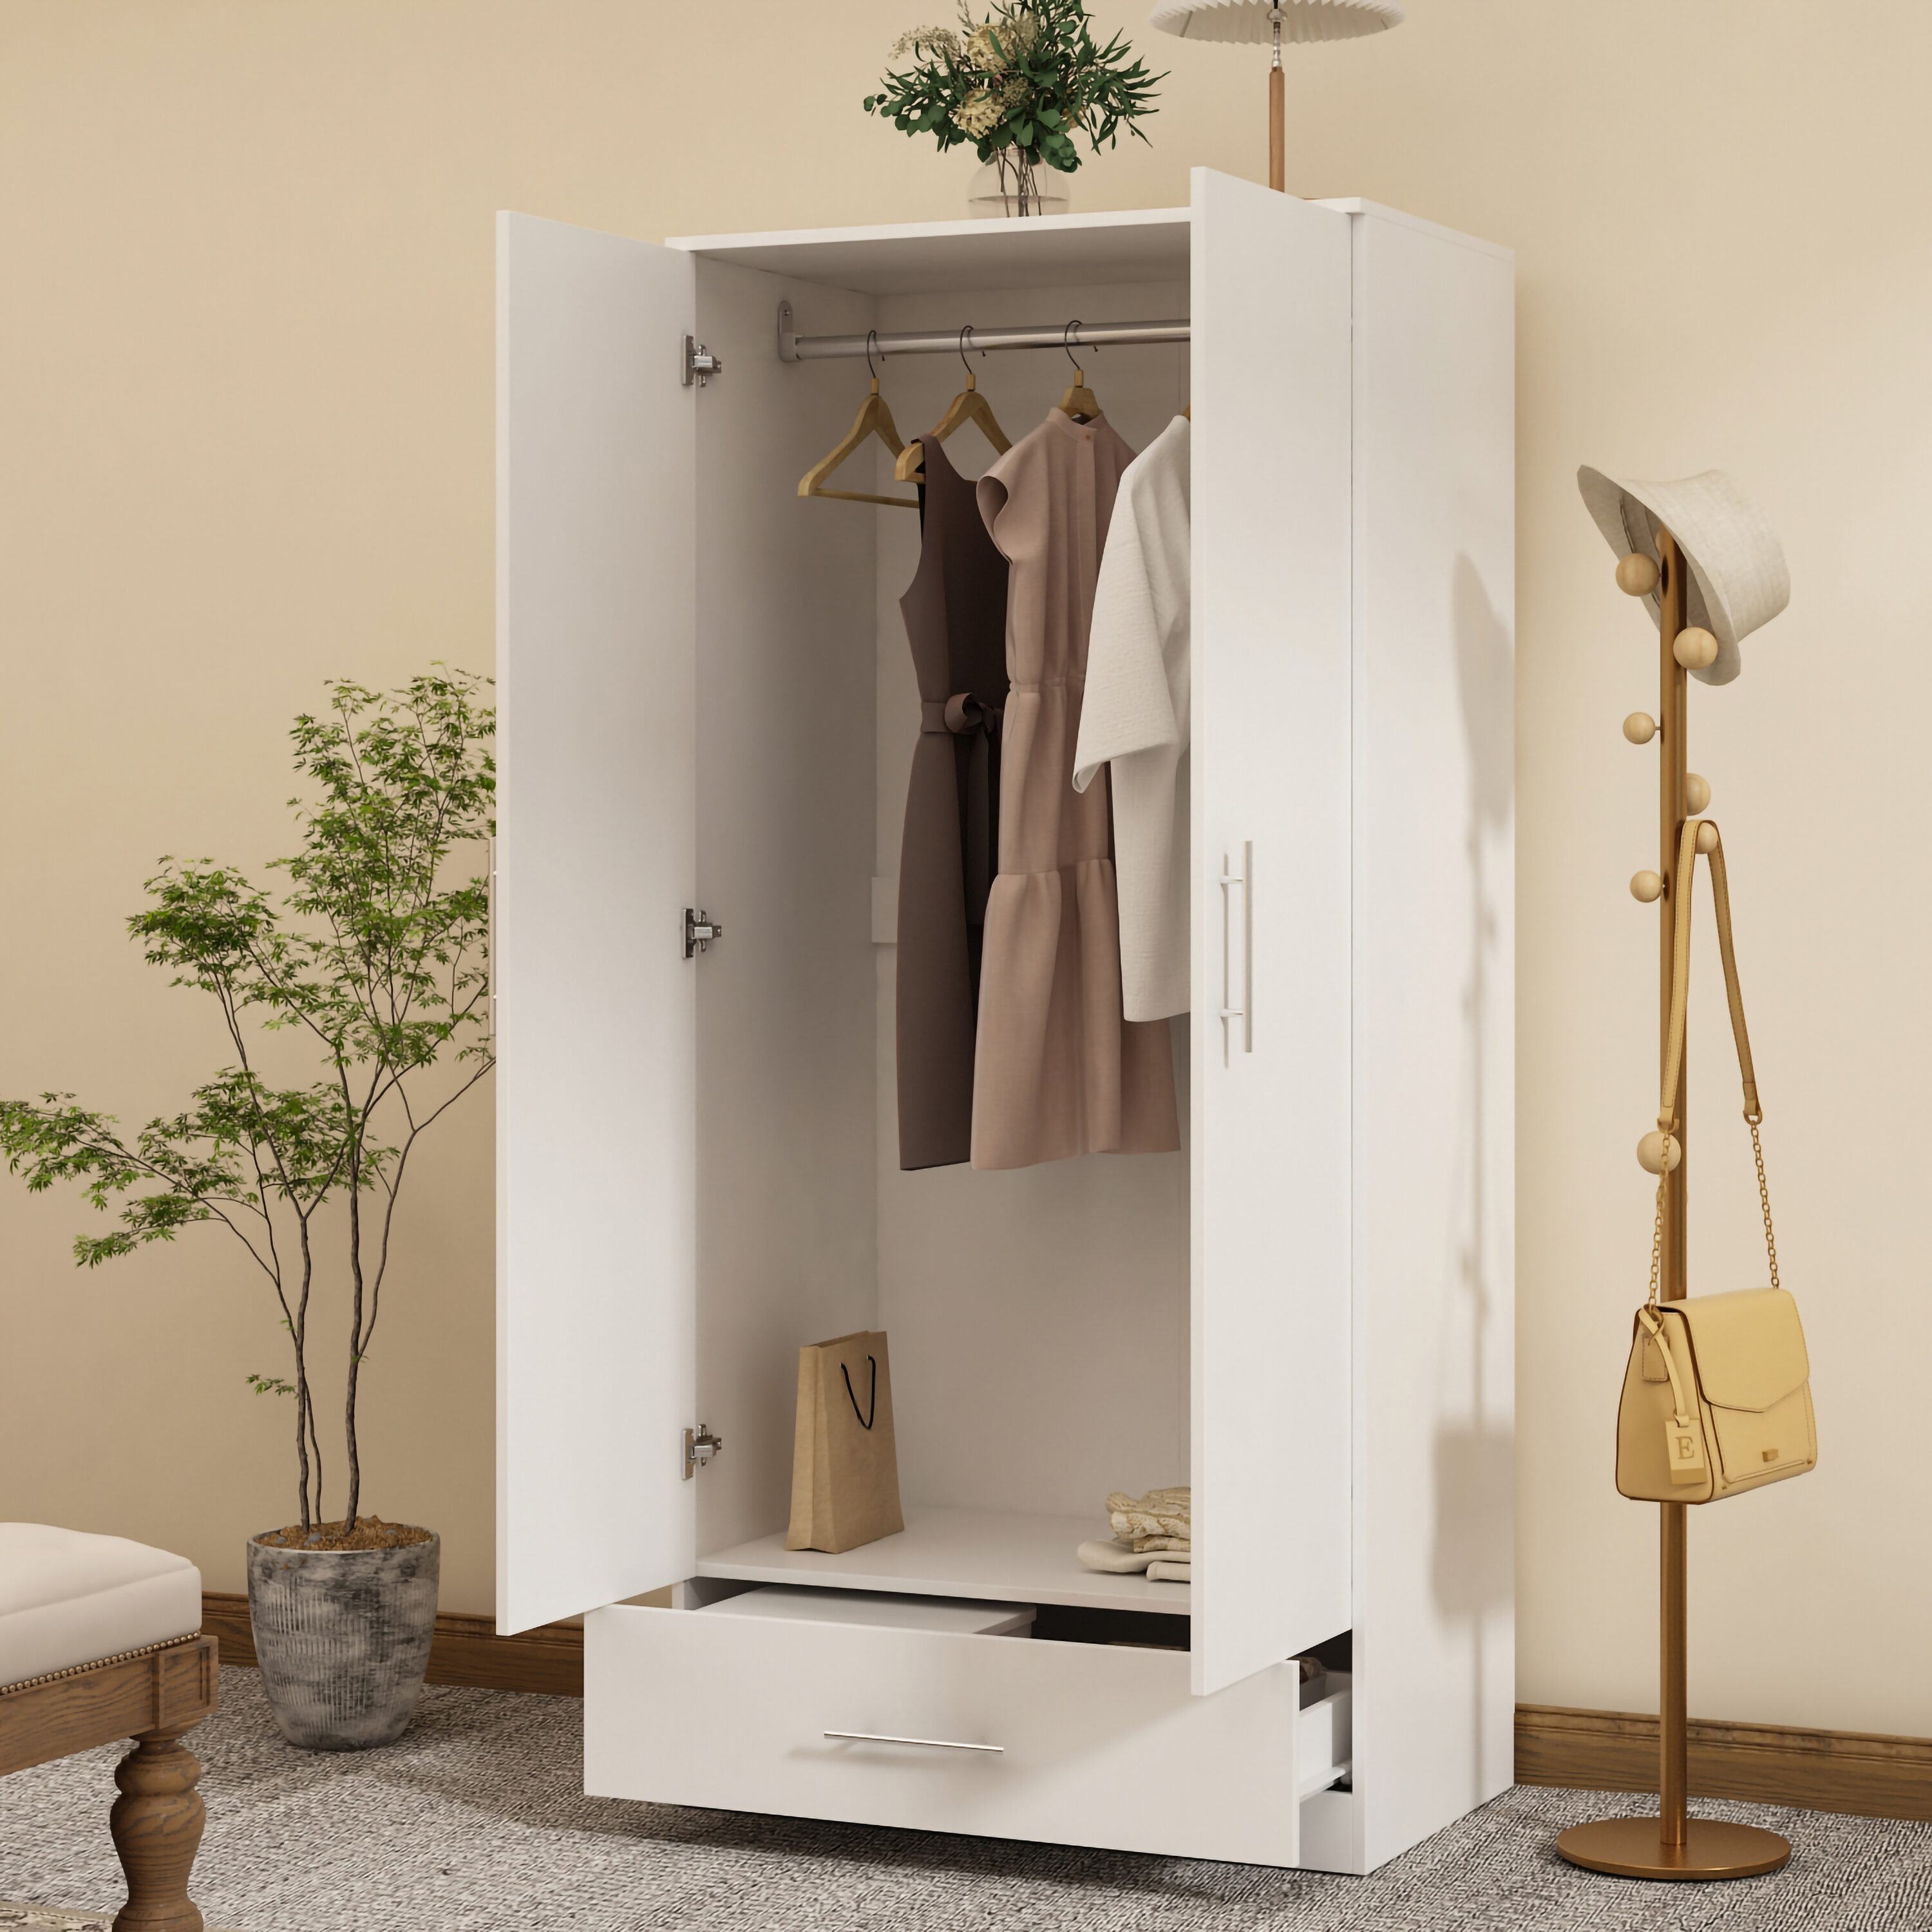 FUFU&GAGA Contemporary 2-Door Wardrobe with Drawer, Clothes Rail, and Moisture-proof Base - White Finish, Assembly Required | LJY-KF200167-04